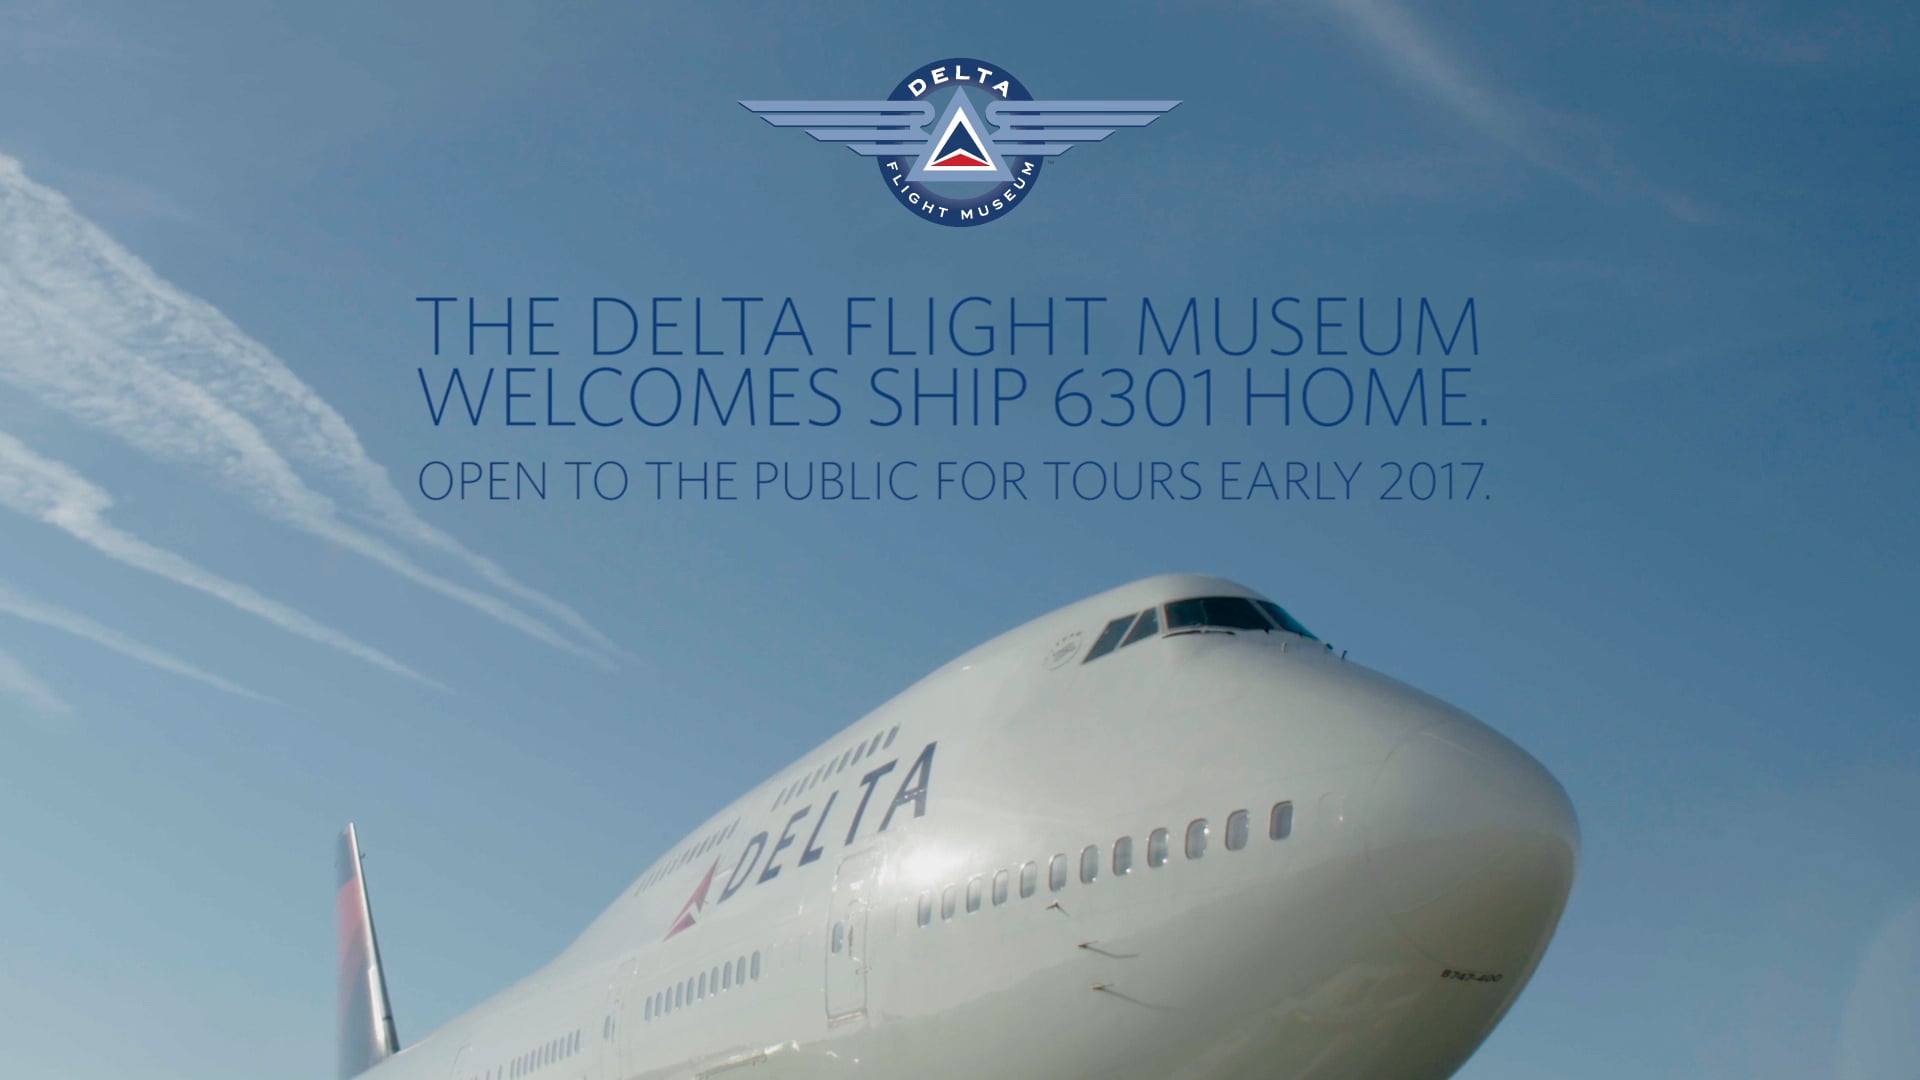 Delta: 747 Move :45 teaser (2016) - Lensed by Jose A. Acosta for Heards Creek.